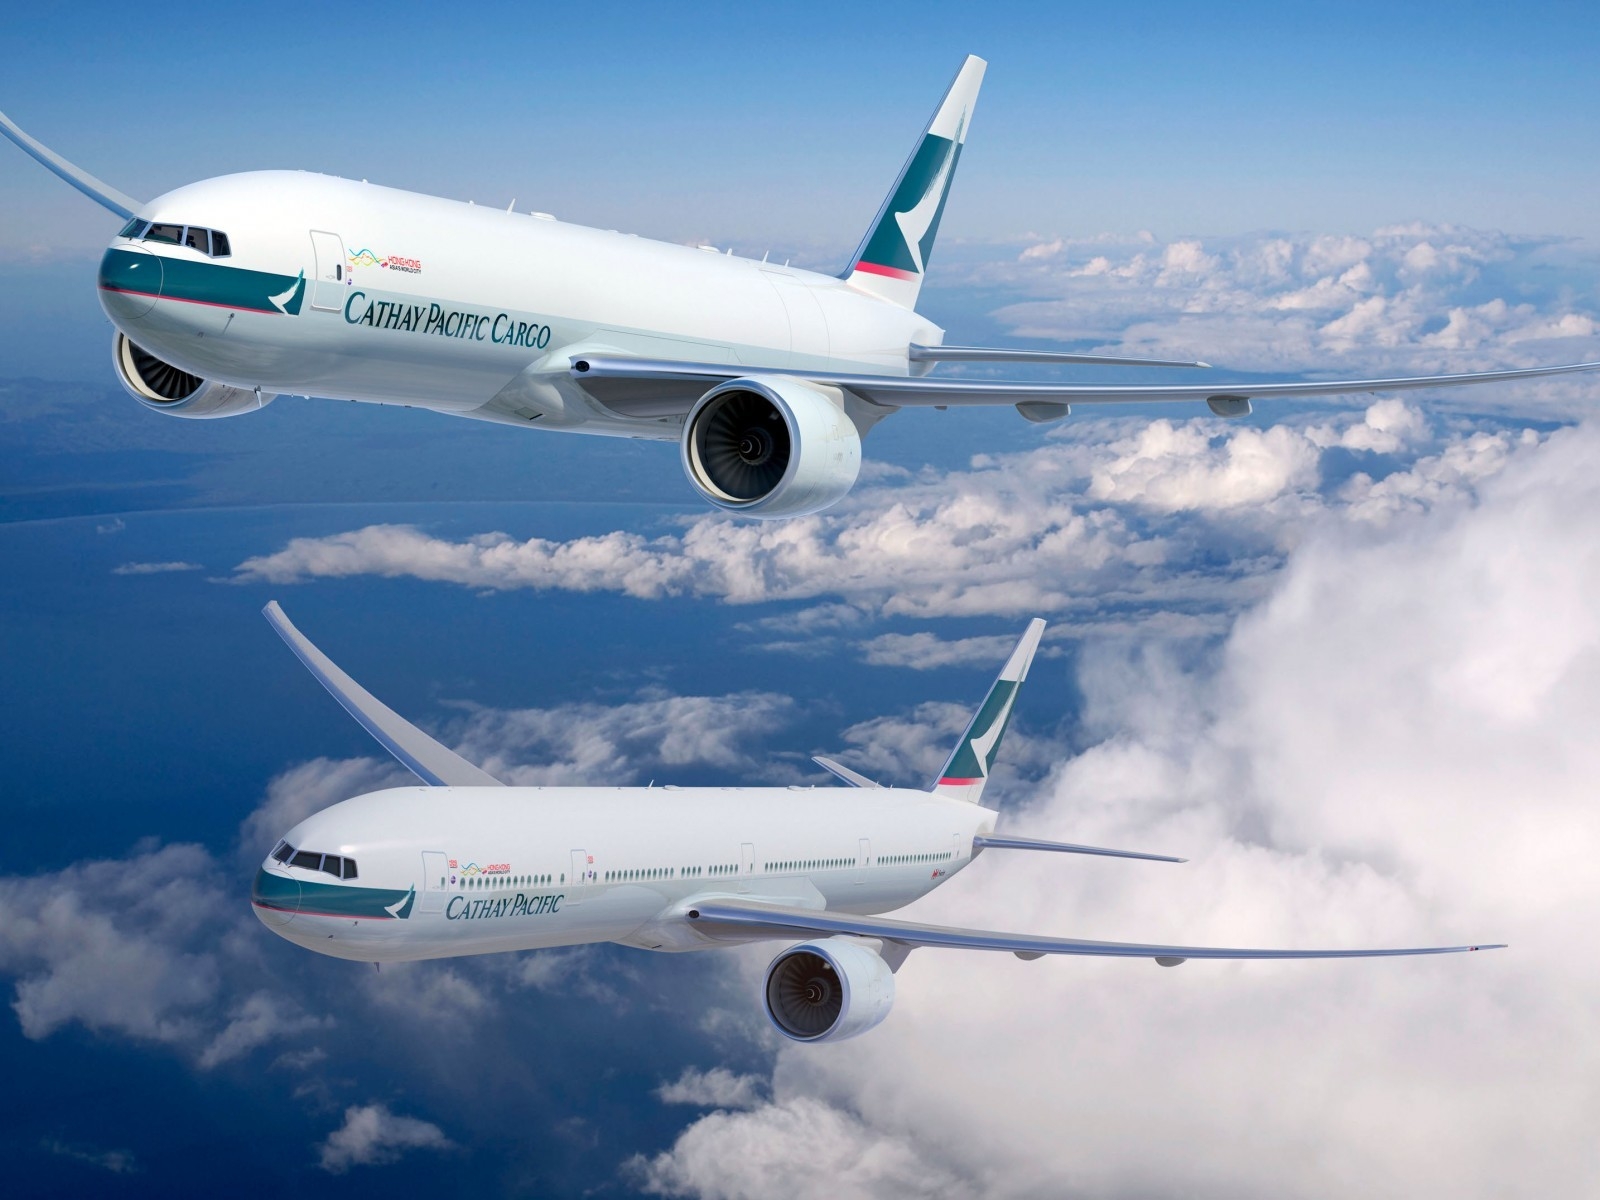 Cathay Pacific Boeing 777 for 1600 x 1200 resolution